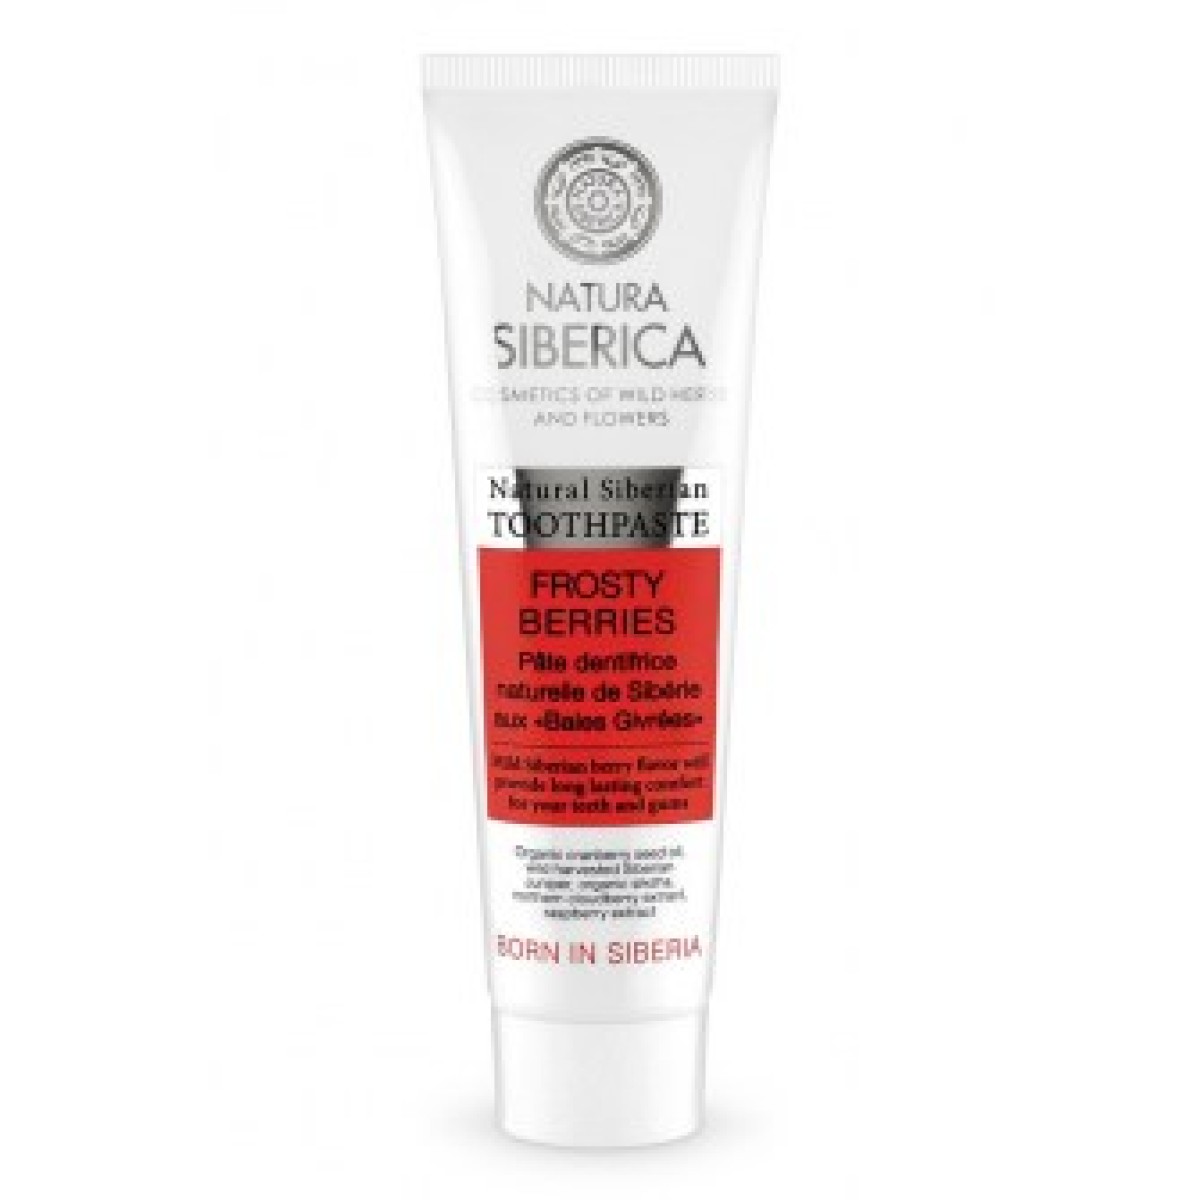 Natura Siberica | Natural Siberian Toothpaste Frosty Berries | 100g